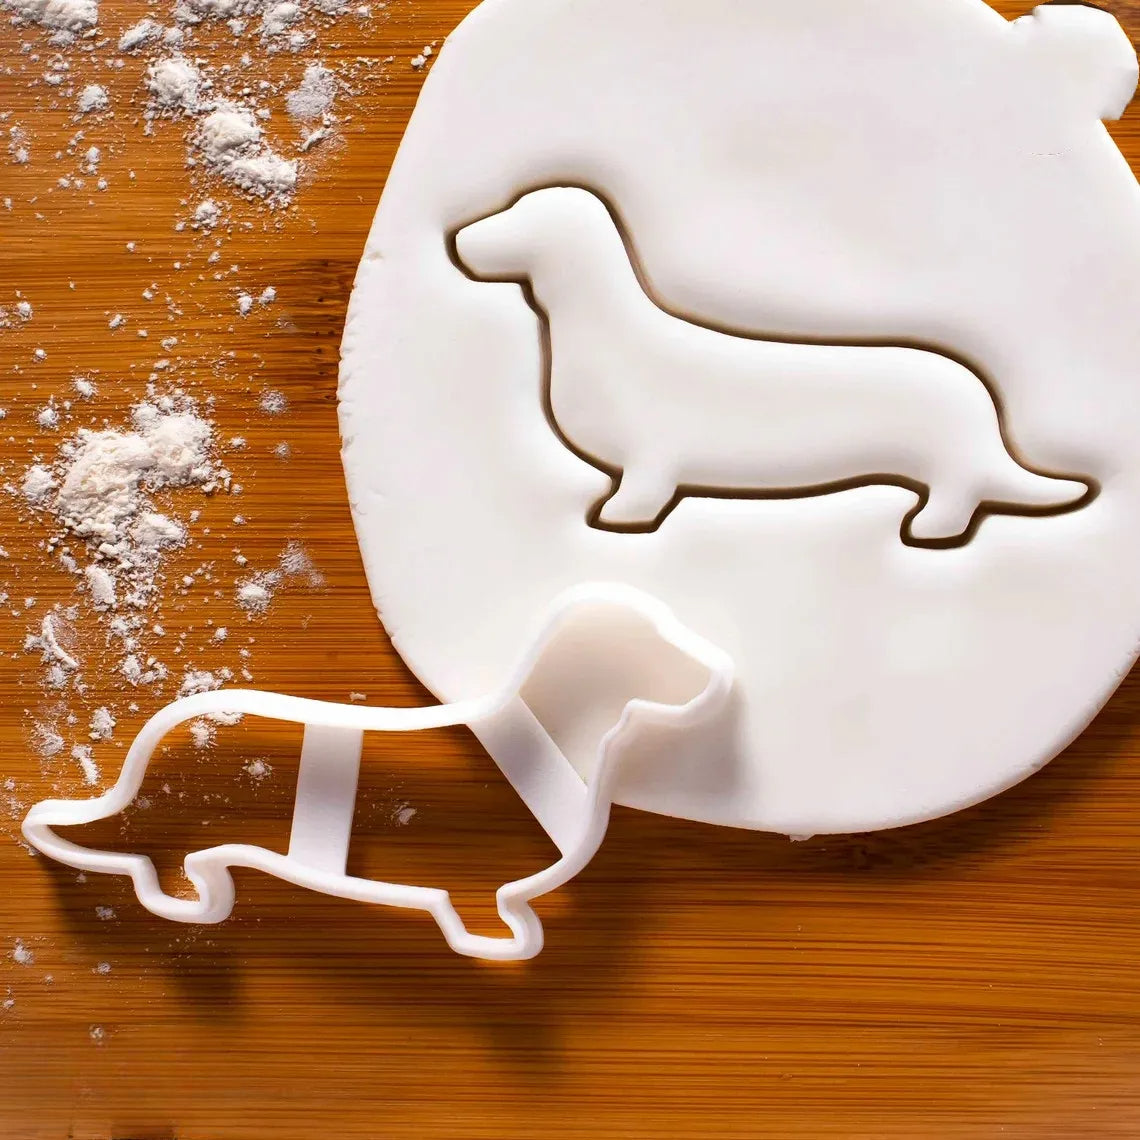 Dachshund Cookie Cutters | The Best Dachshund Gifts